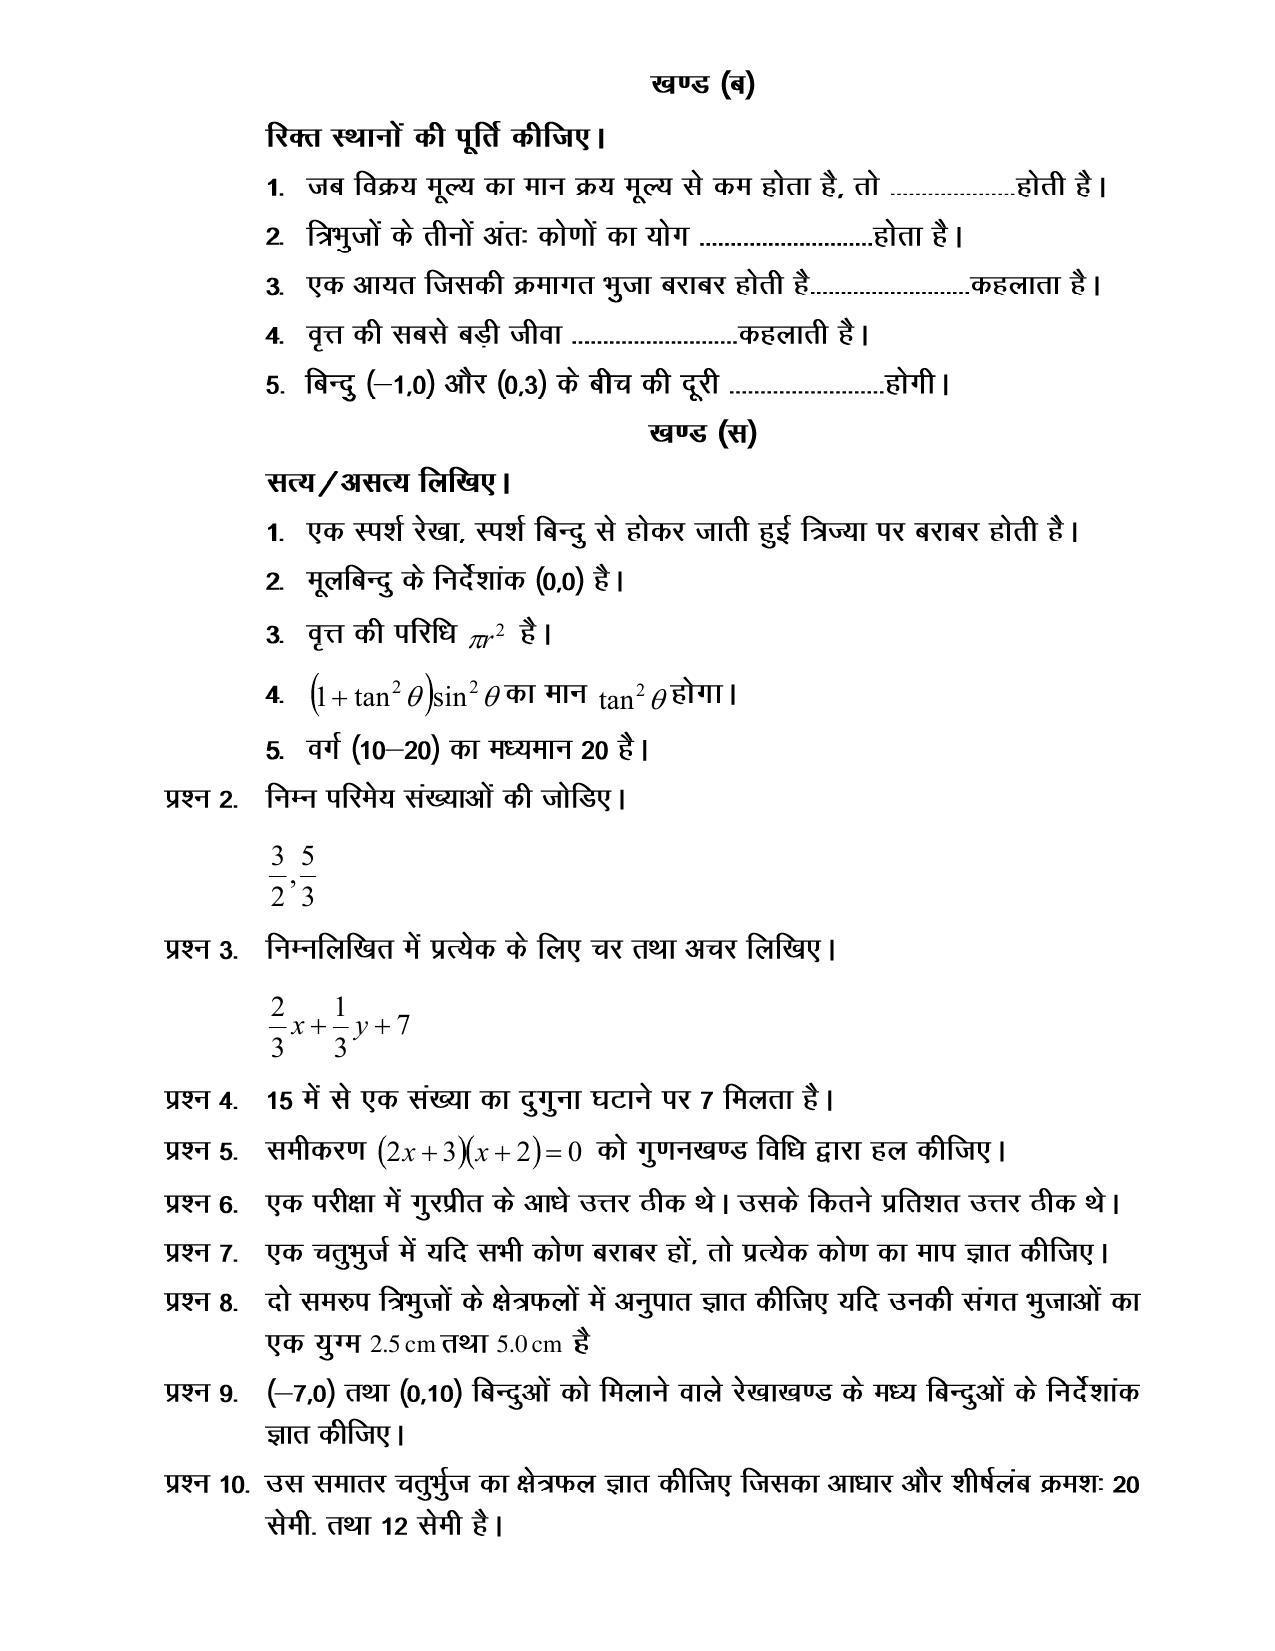 CGSOS Class 10th Model Question Paper - Mathematics - I - Page 3